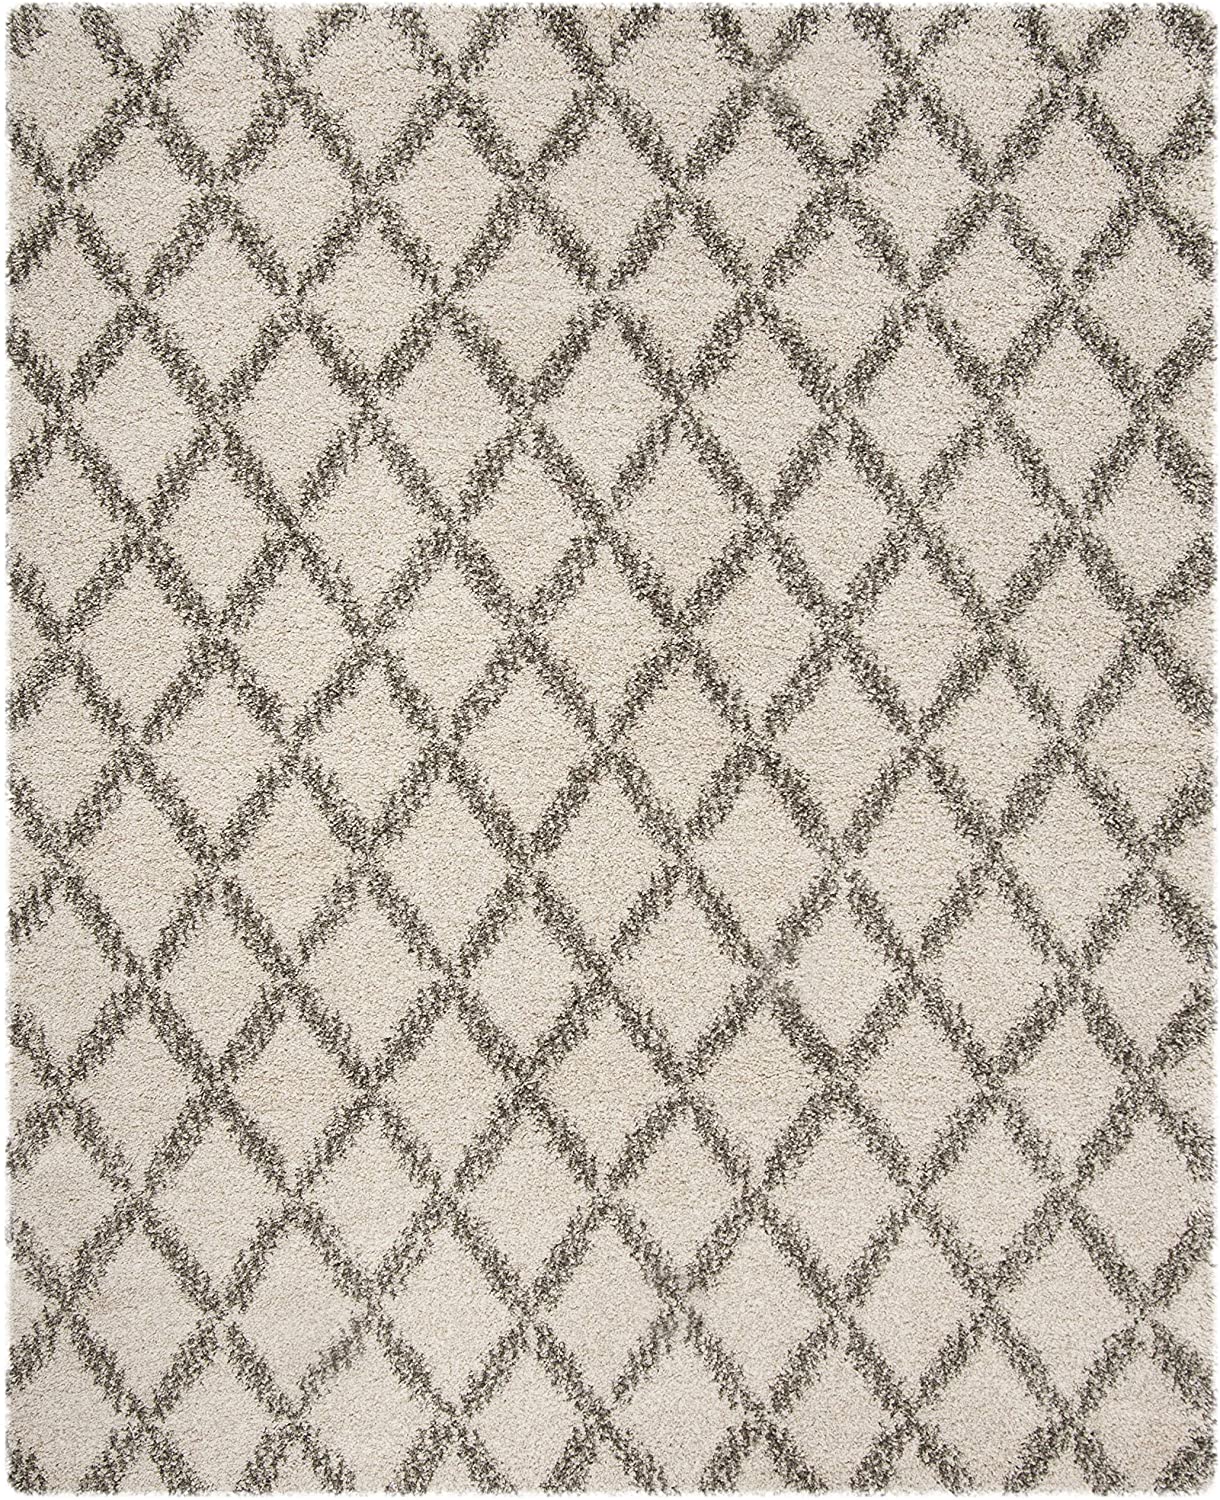 SAFAVIEH Hudson Shag Collection Moroccan Trellis Non-Shedding Living Room Bedroom Dining Room Entryway Plush 2-inch Thick Runner, , Ivory / Grey